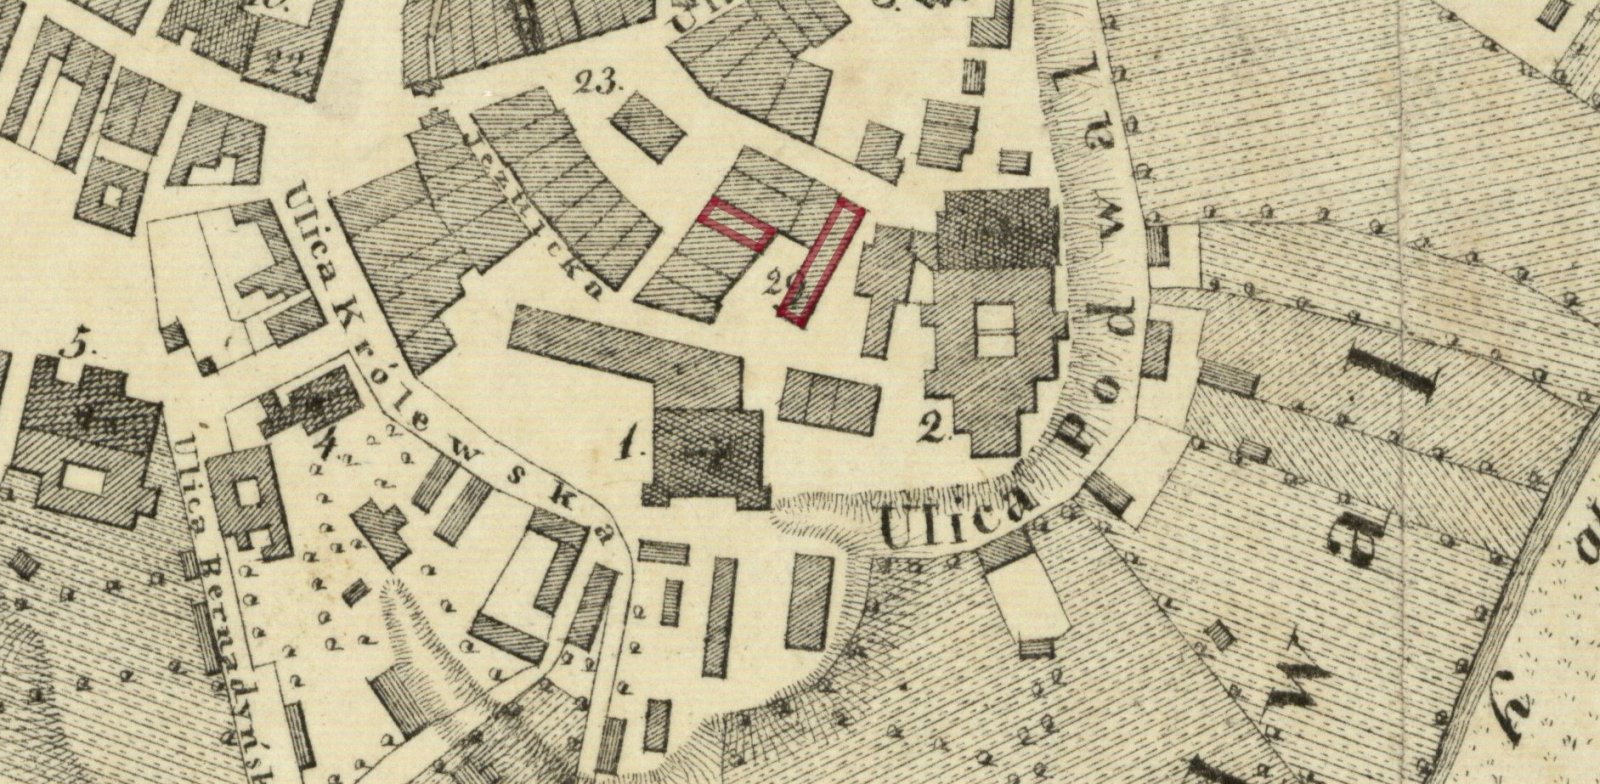 A city map of Lublin from 1829 showing townhouses belonging to Łukasz Rodakiewicz: 11 Rynek and 20 Jezuicka, collection of the National Library of Poland.